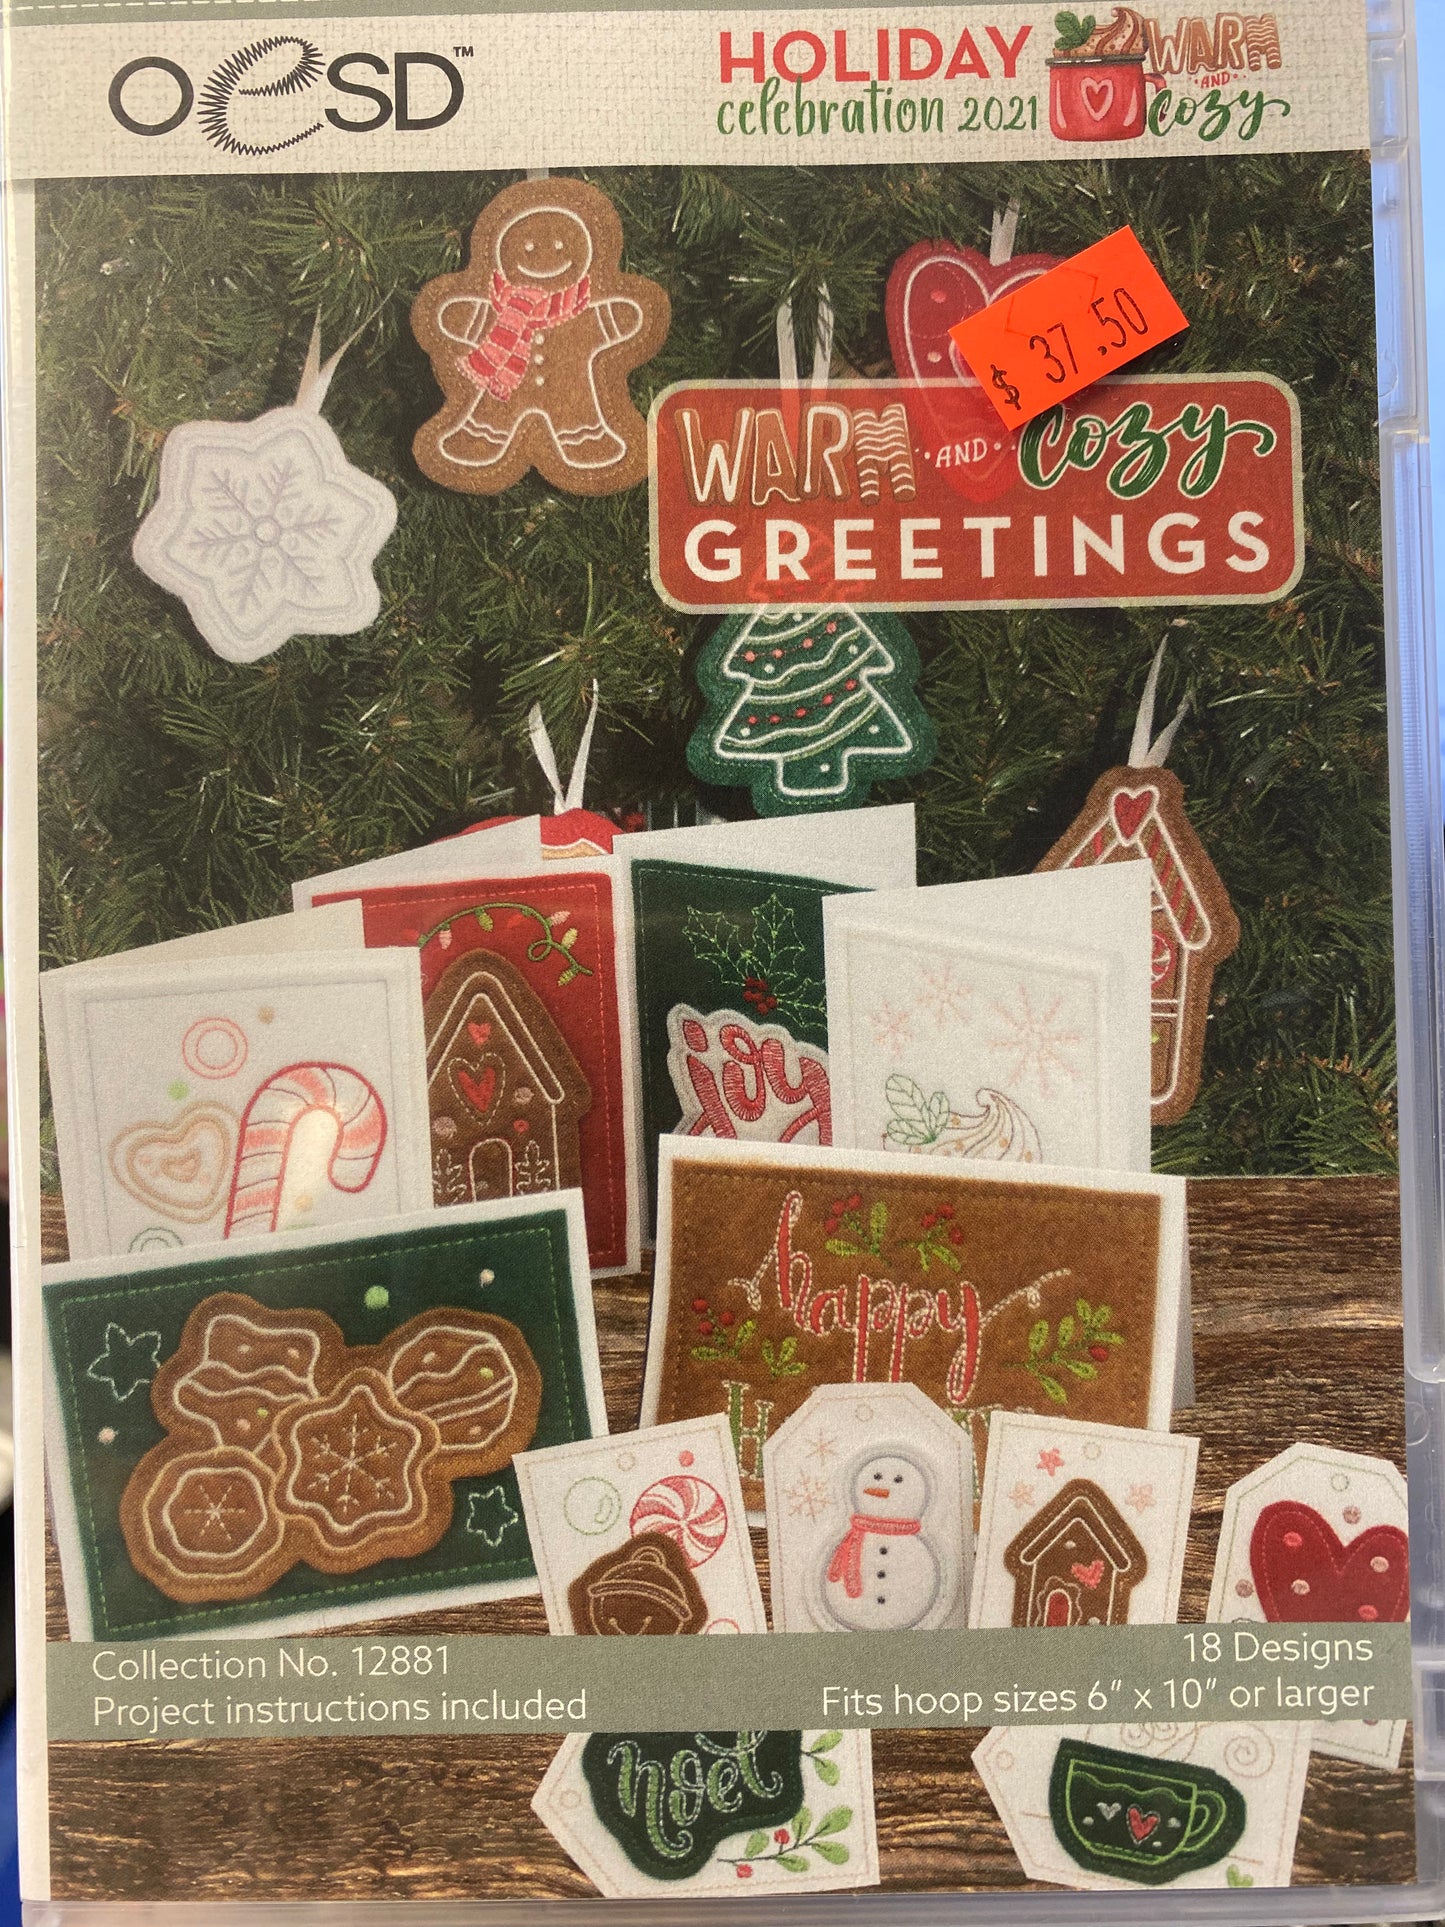 OESD Holiday 2021 Warm, Cozy Greetings, or Embroidery Designs